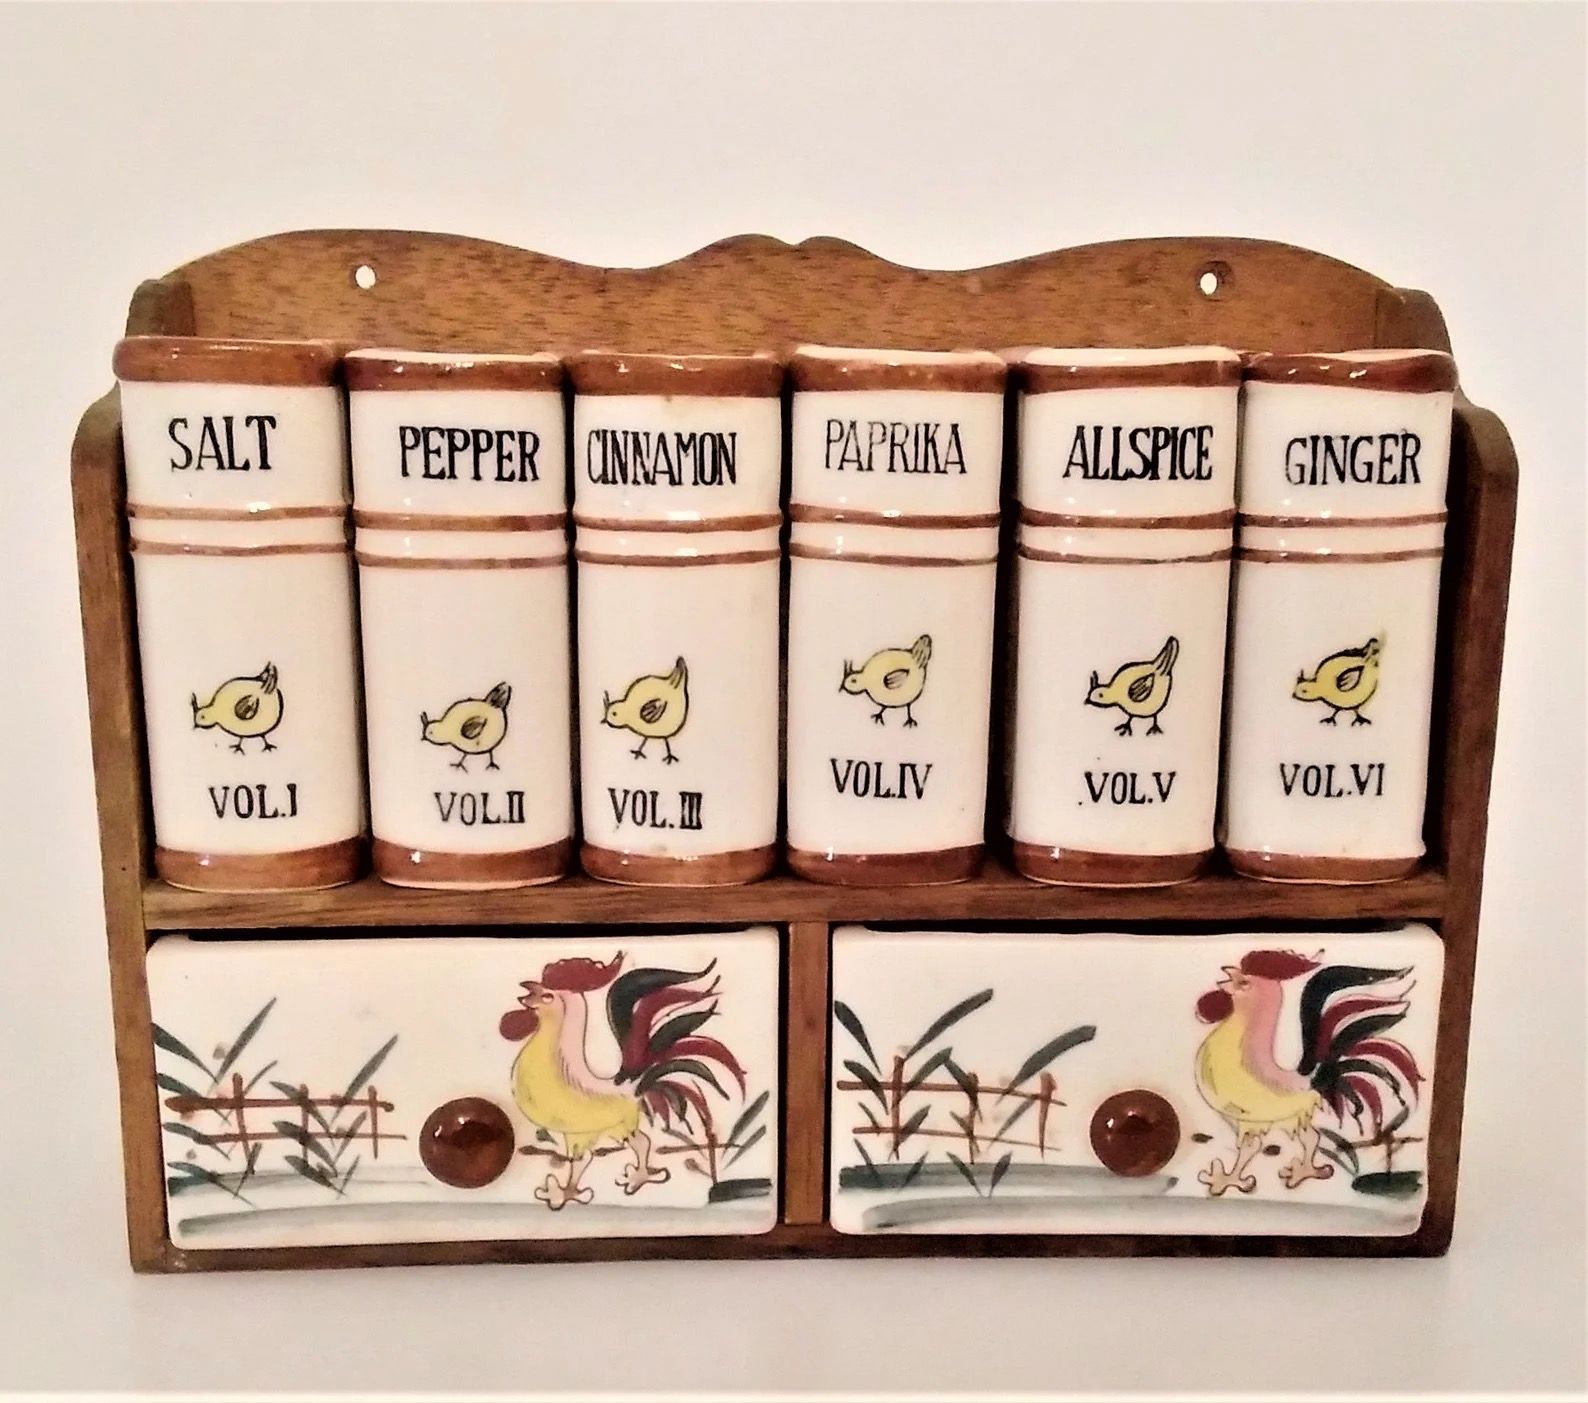 A vintage spice rack holding six ceramic spice jars shaped like books, labeled with the names of spices and 'Vol I, Vol II, Vol III' etc. The shelf has two small drawers painted with roosters below the spice jars.